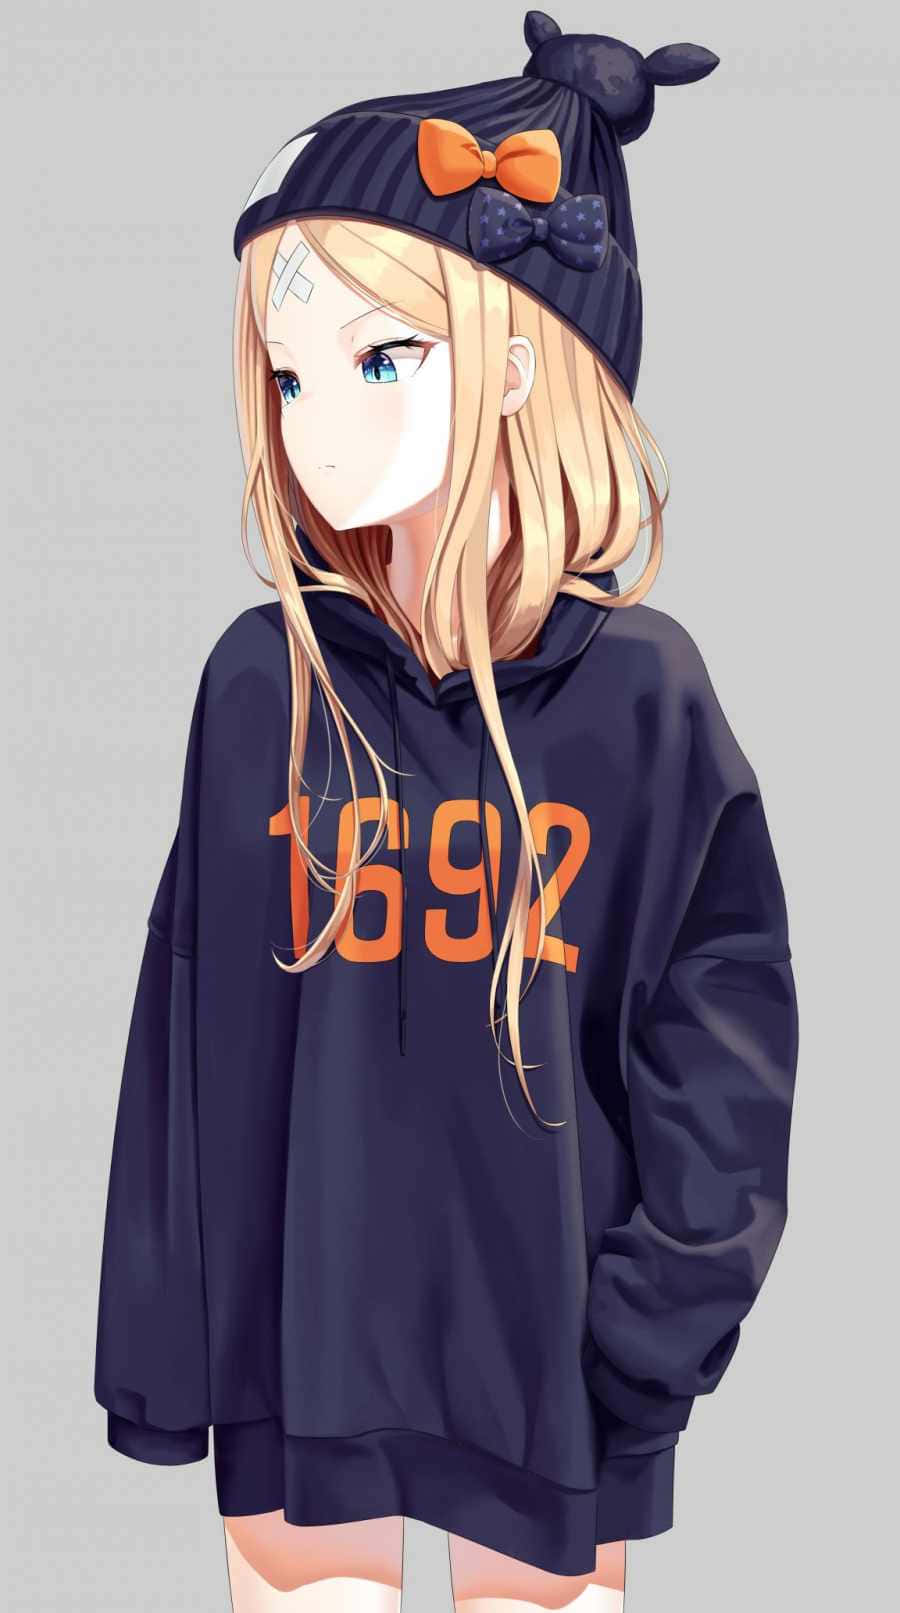 Cute Anime girl with a hoodie! by vrishnan on DeviantArt